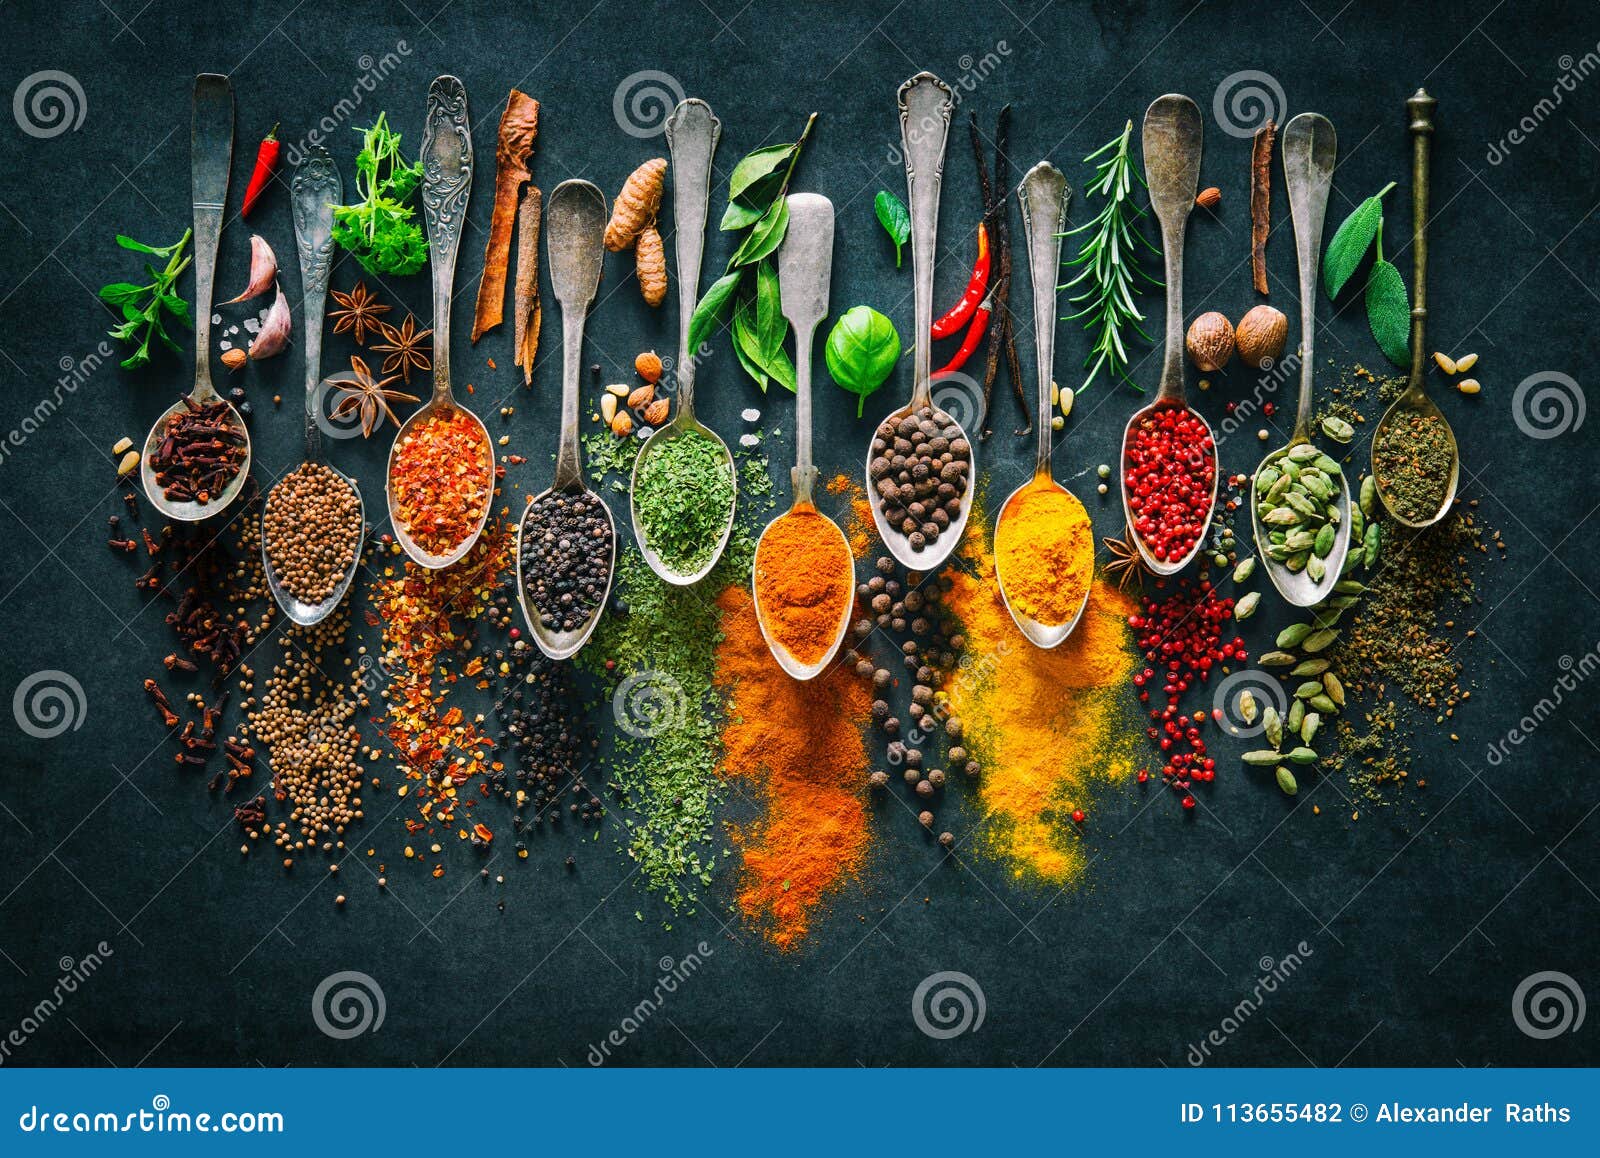 spices, spoons, spoons with spices, Spices, Pinterest, Spoon and